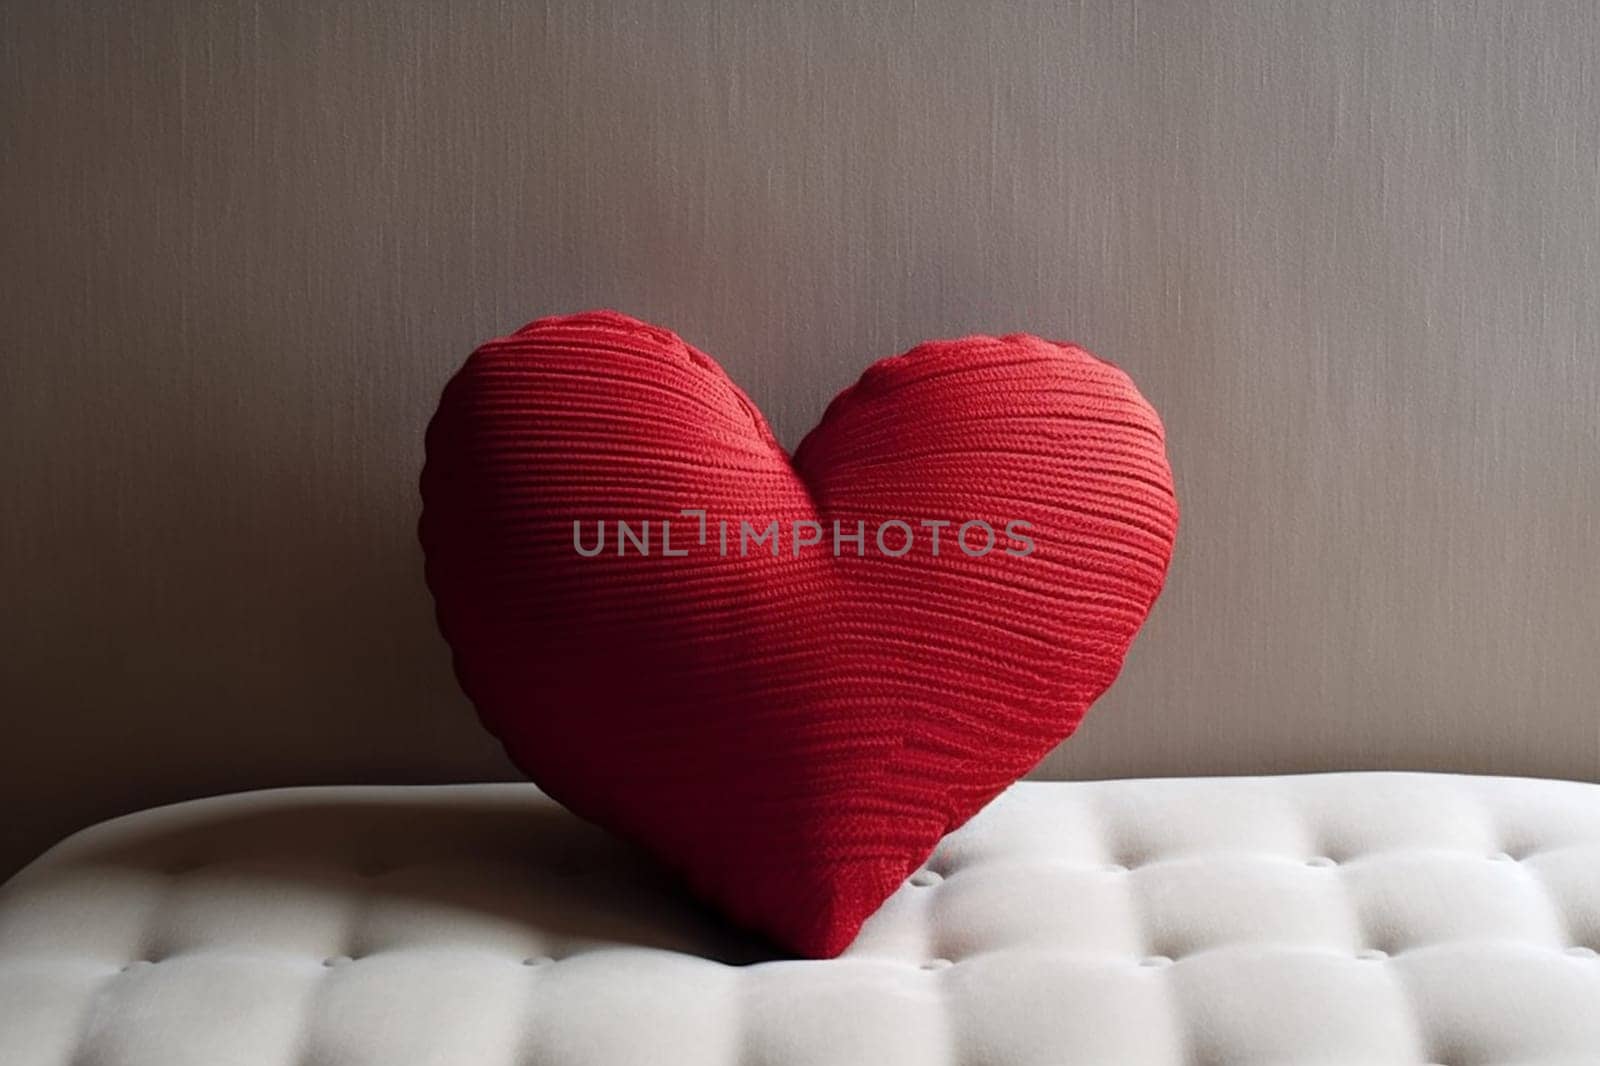 A red knitted heart cushion on a white textured surface.